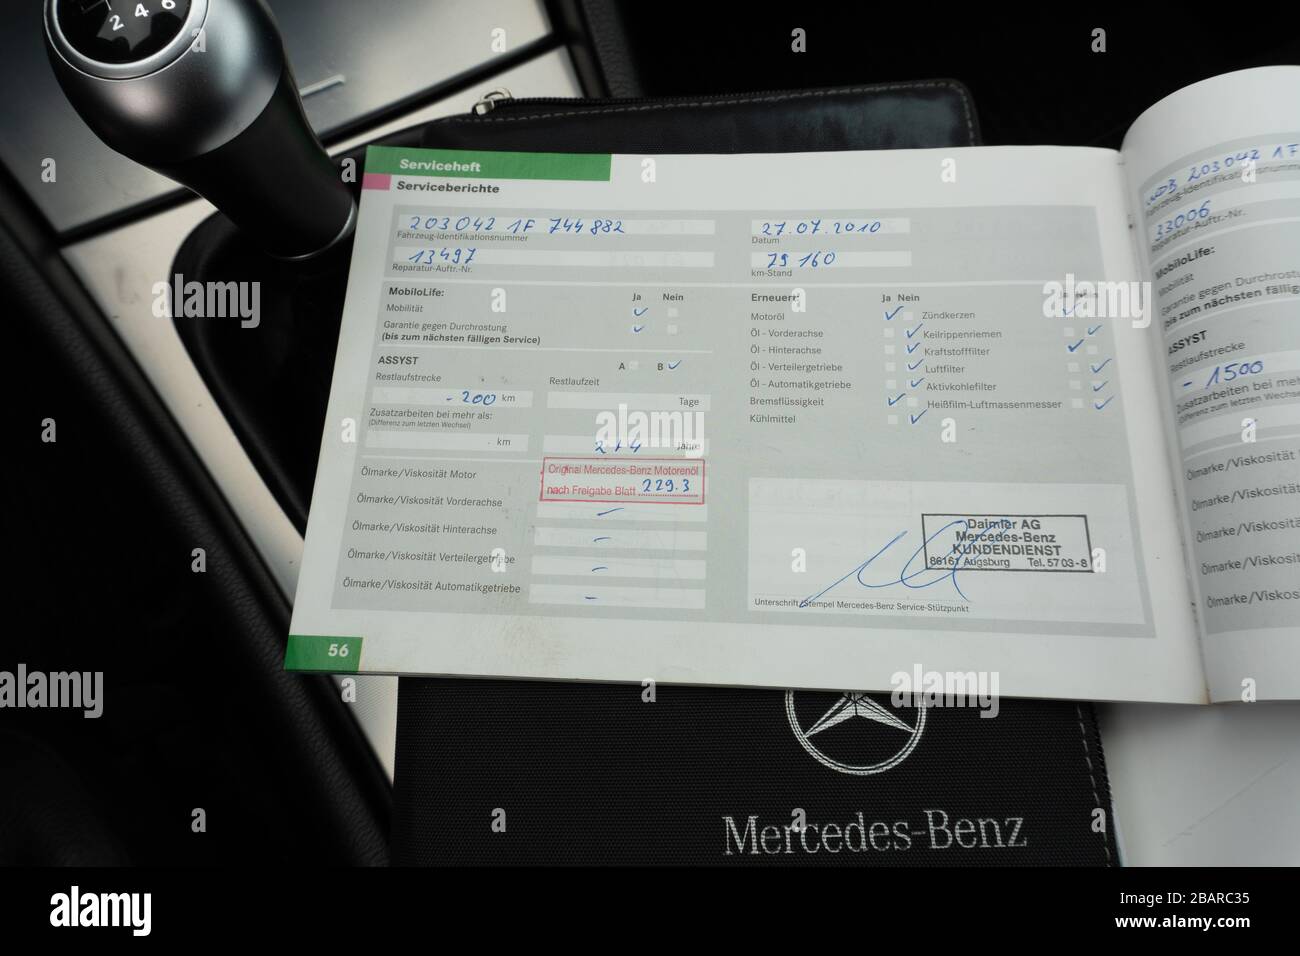 Mercedes Benz service history book-scheduled maintenance, check engine  faults, repair and maintenance records Stock Photo - Alamy